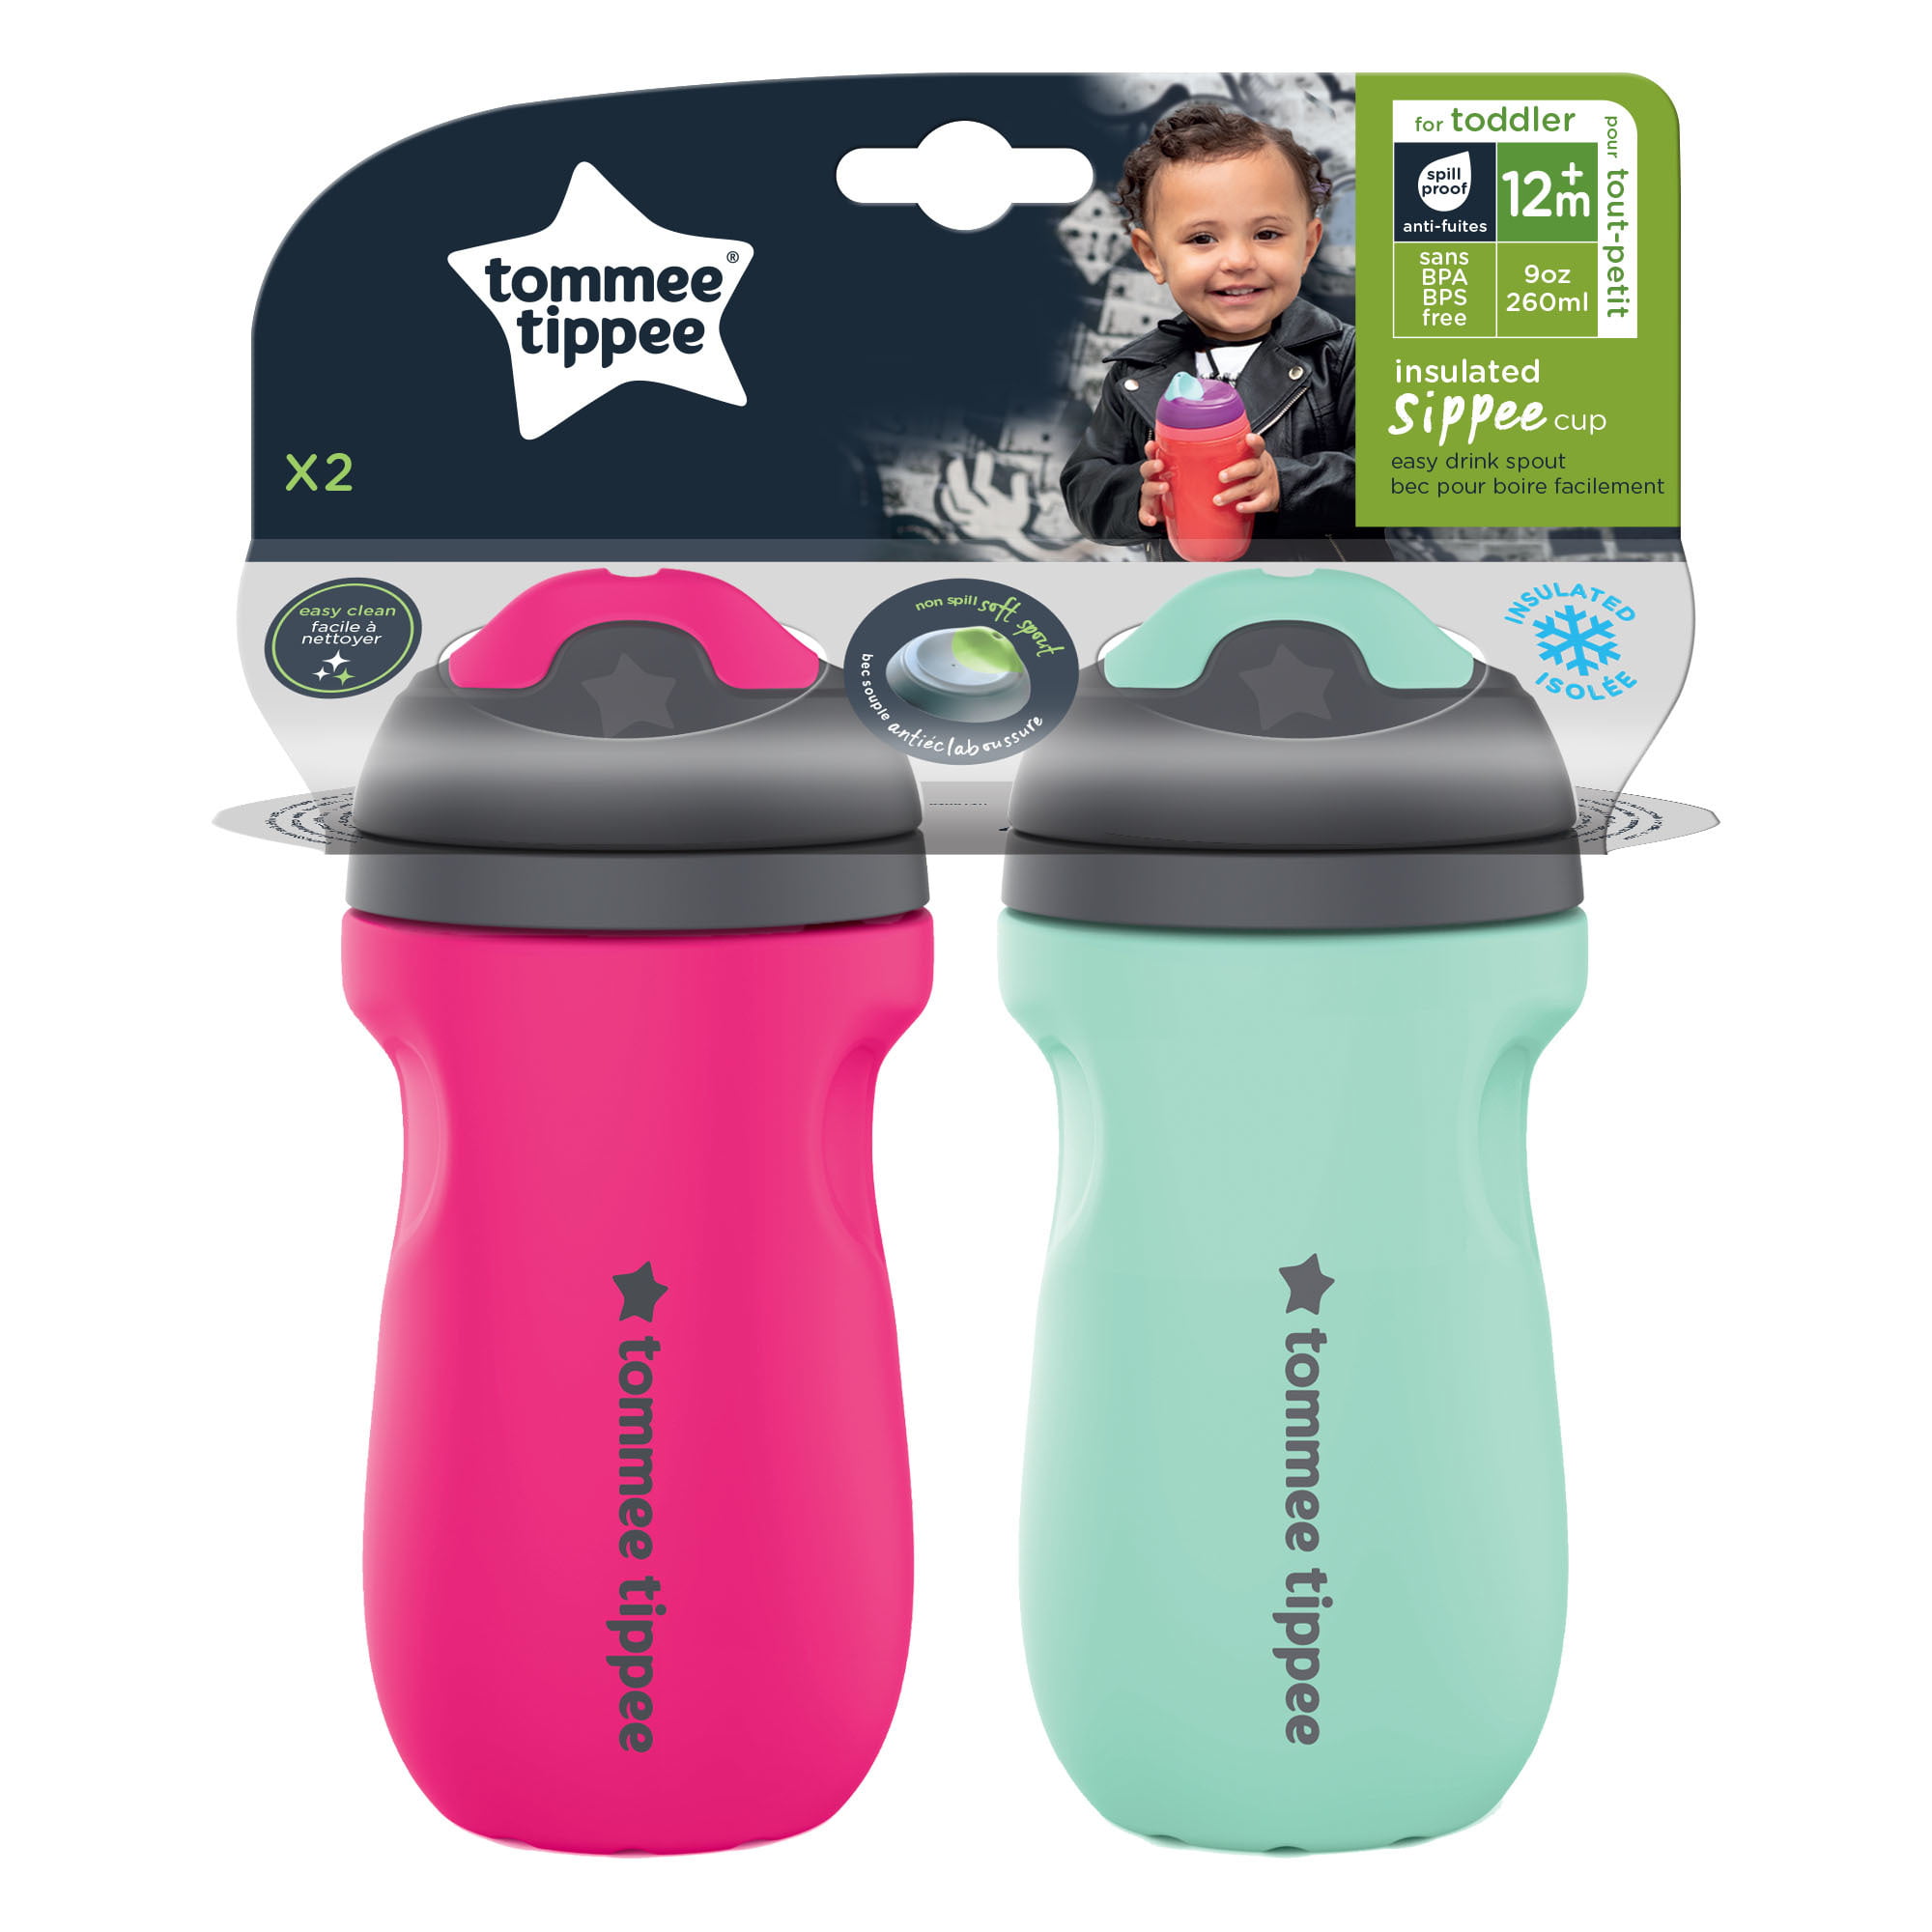 Tommee Tippee Insulated Sippee Toddler Tumbler Cup, 12+ months – 2